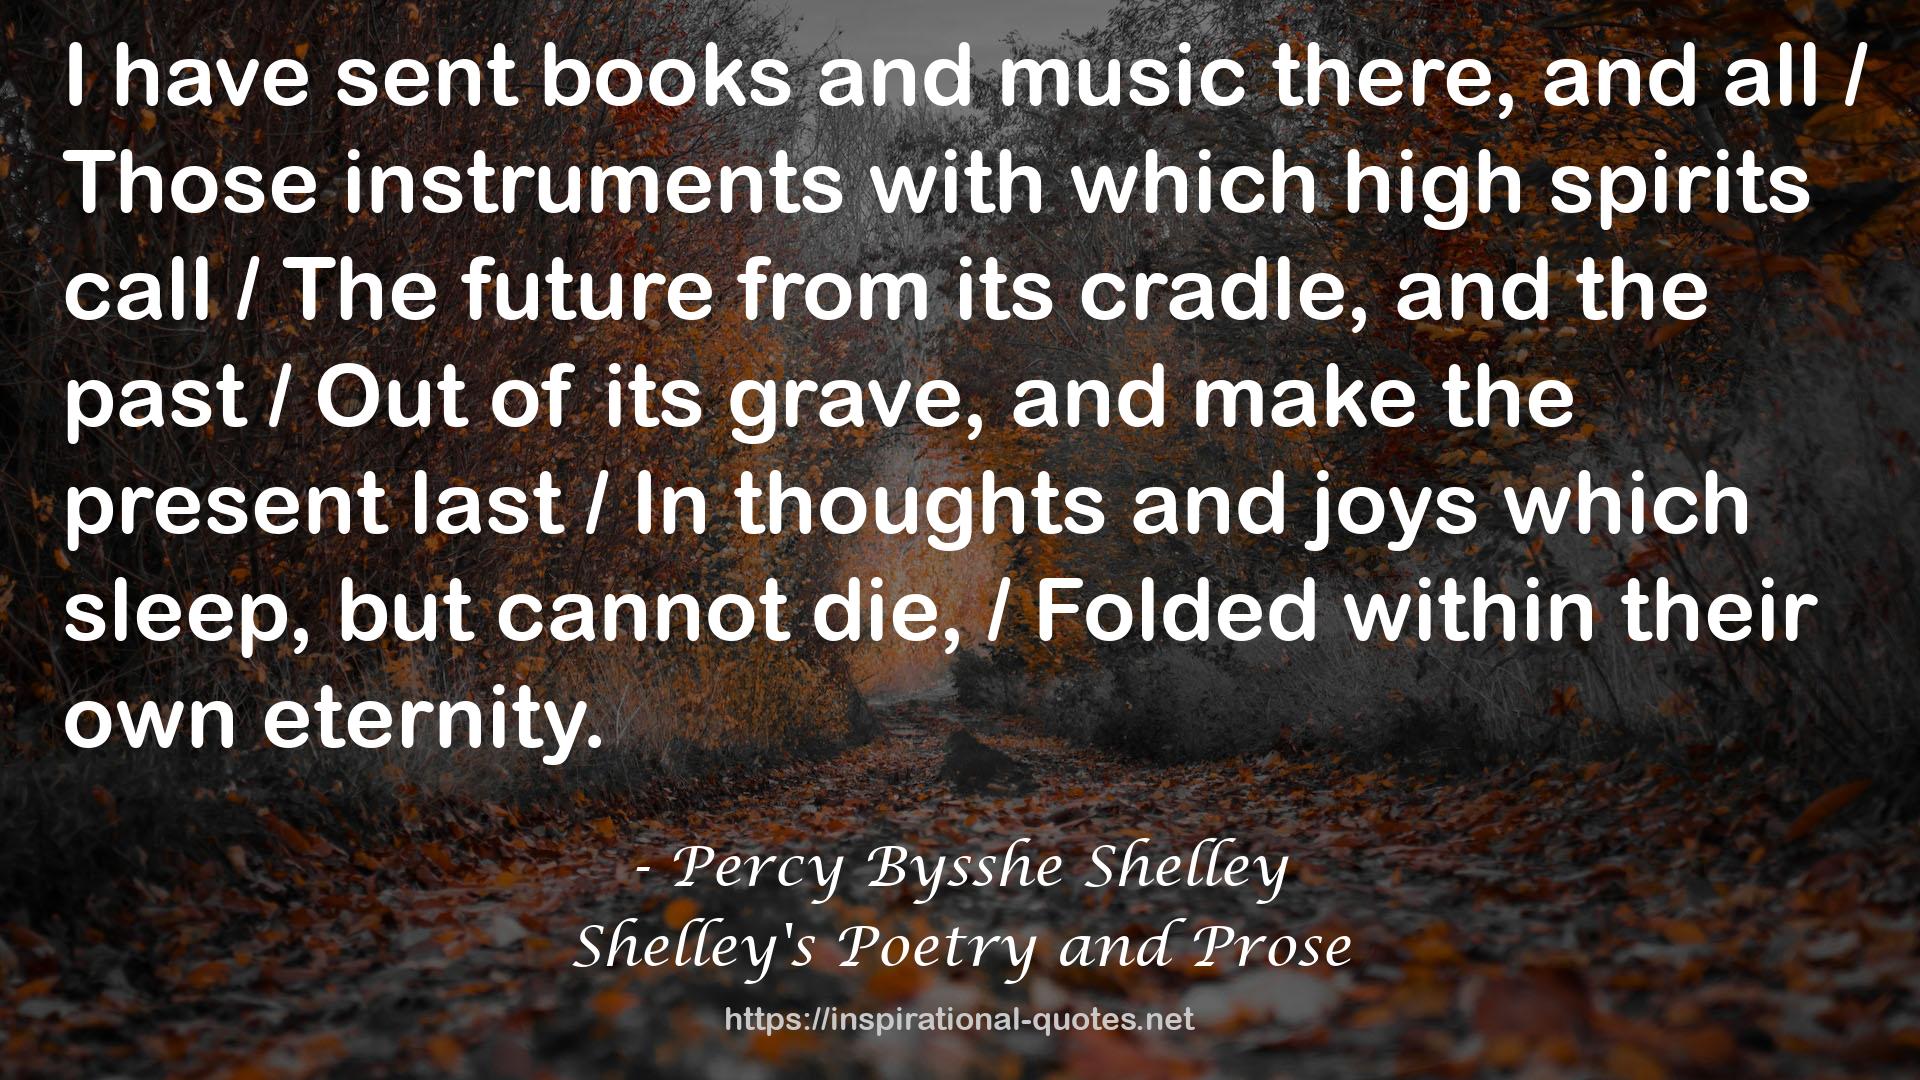 Shelley's Poetry and Prose QUOTES